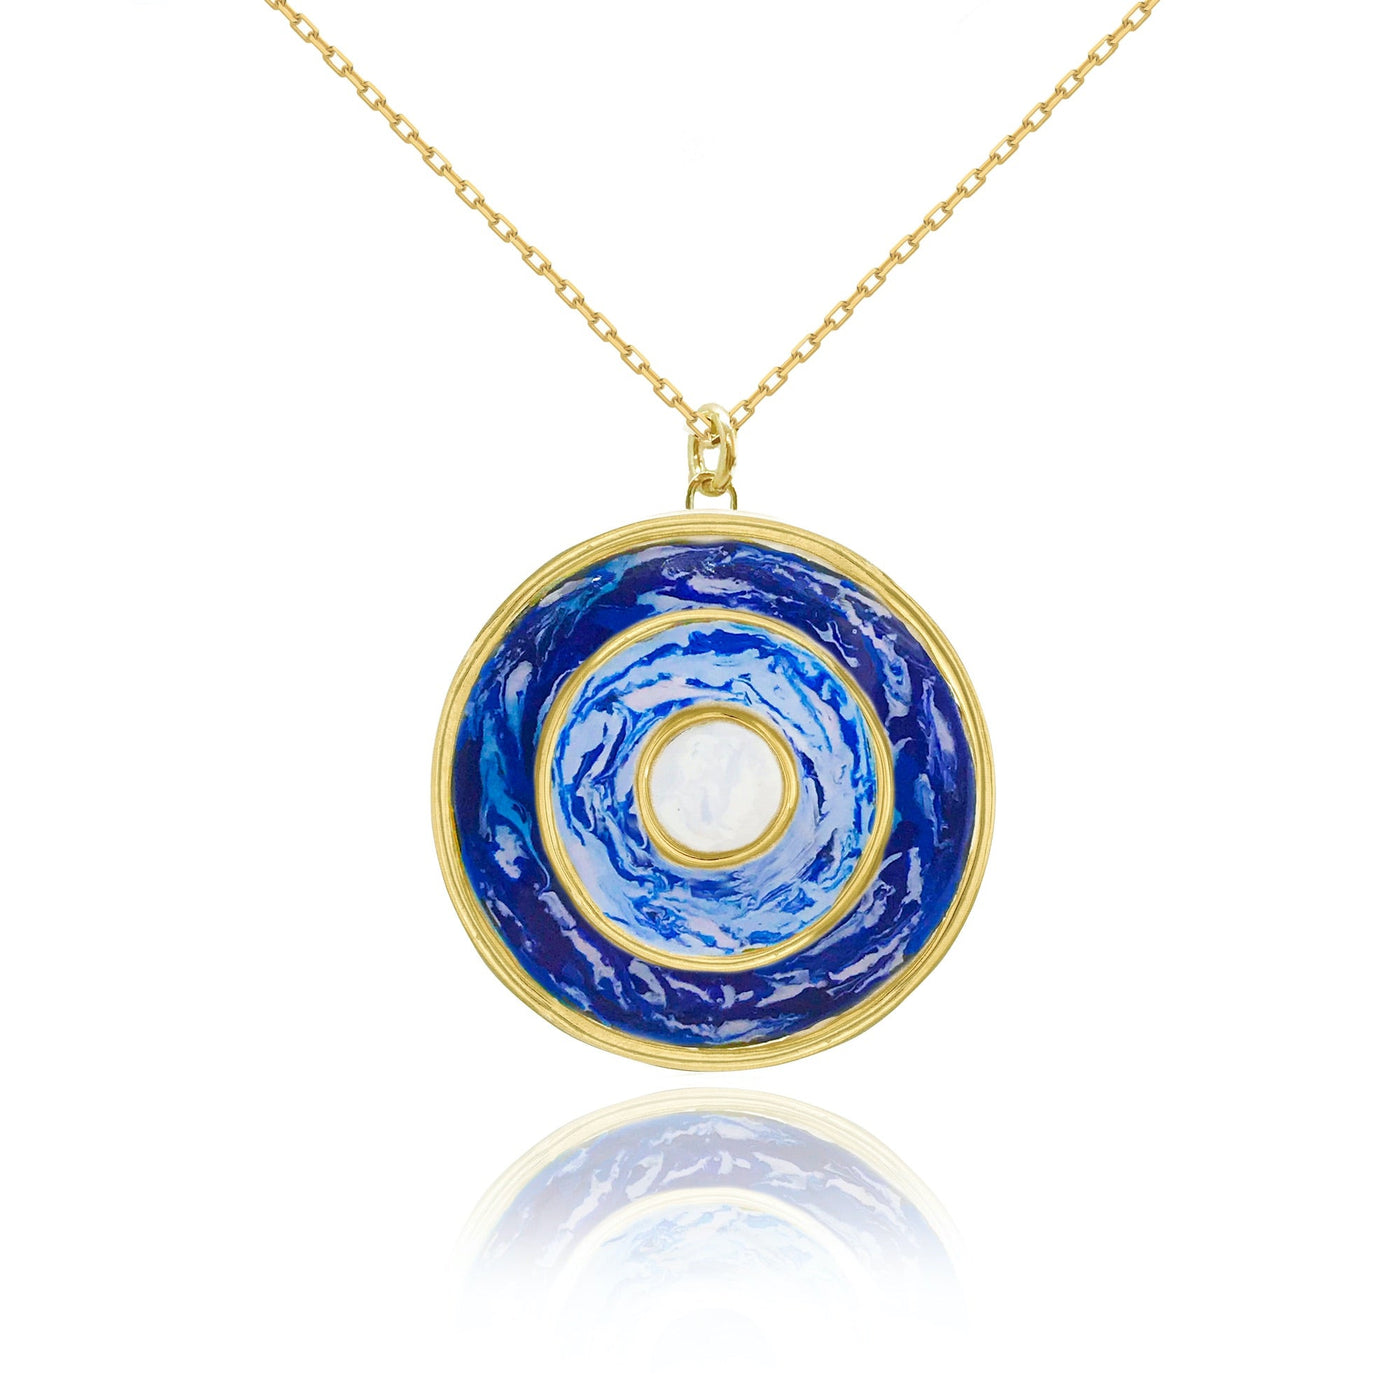 Gold round pendant necklace with blue marbled enamel work from Atelier ORMAN